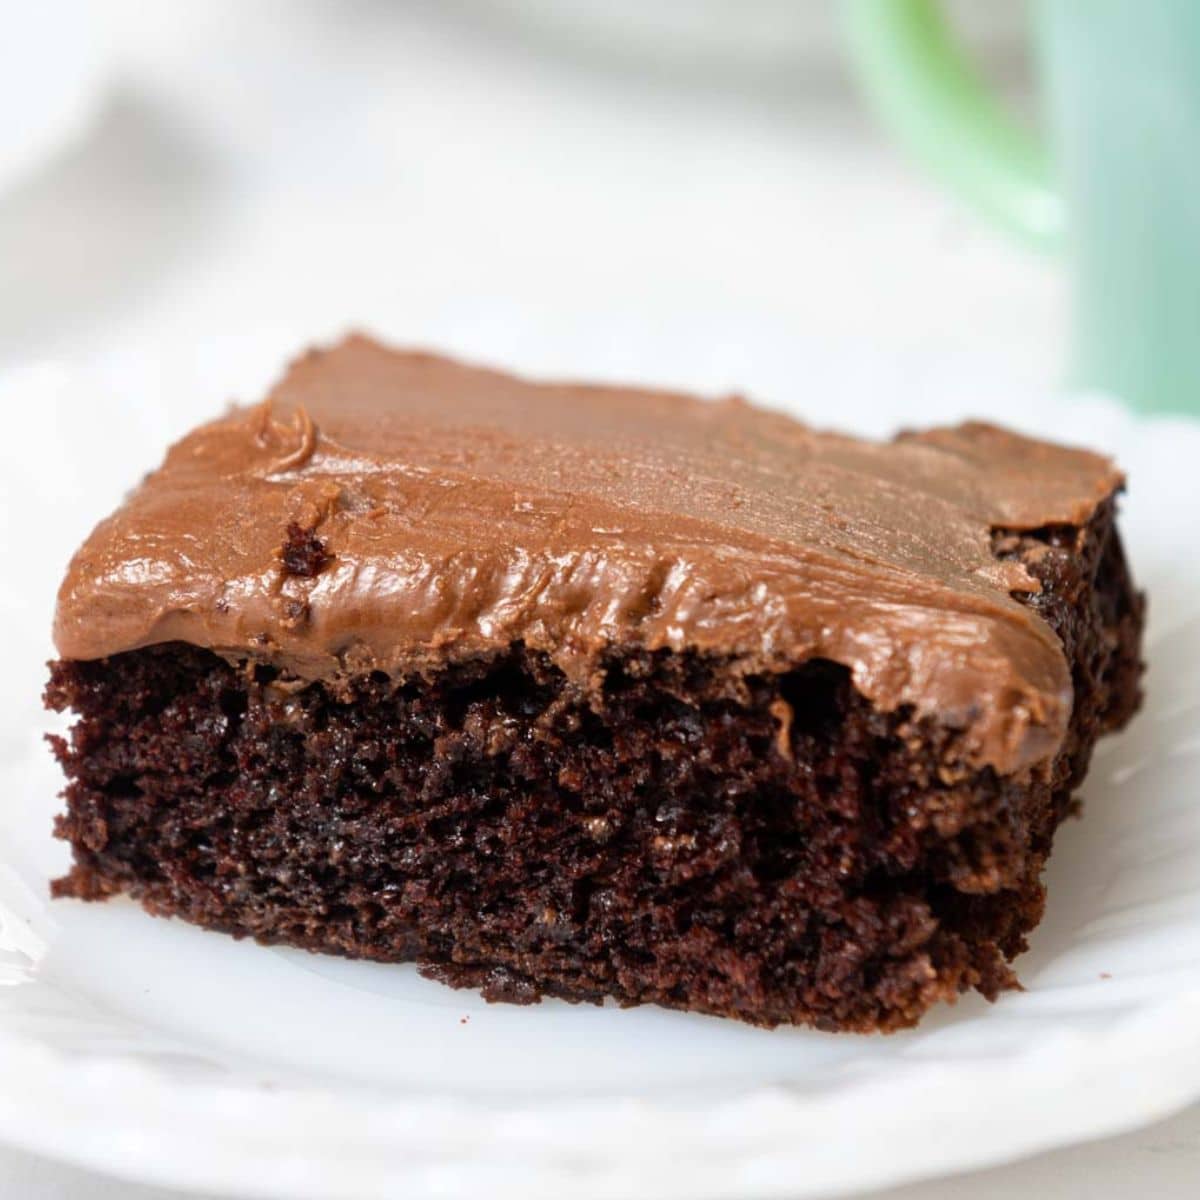 Chocolate cake with brown frosting on a white plate with a green mug in the background.